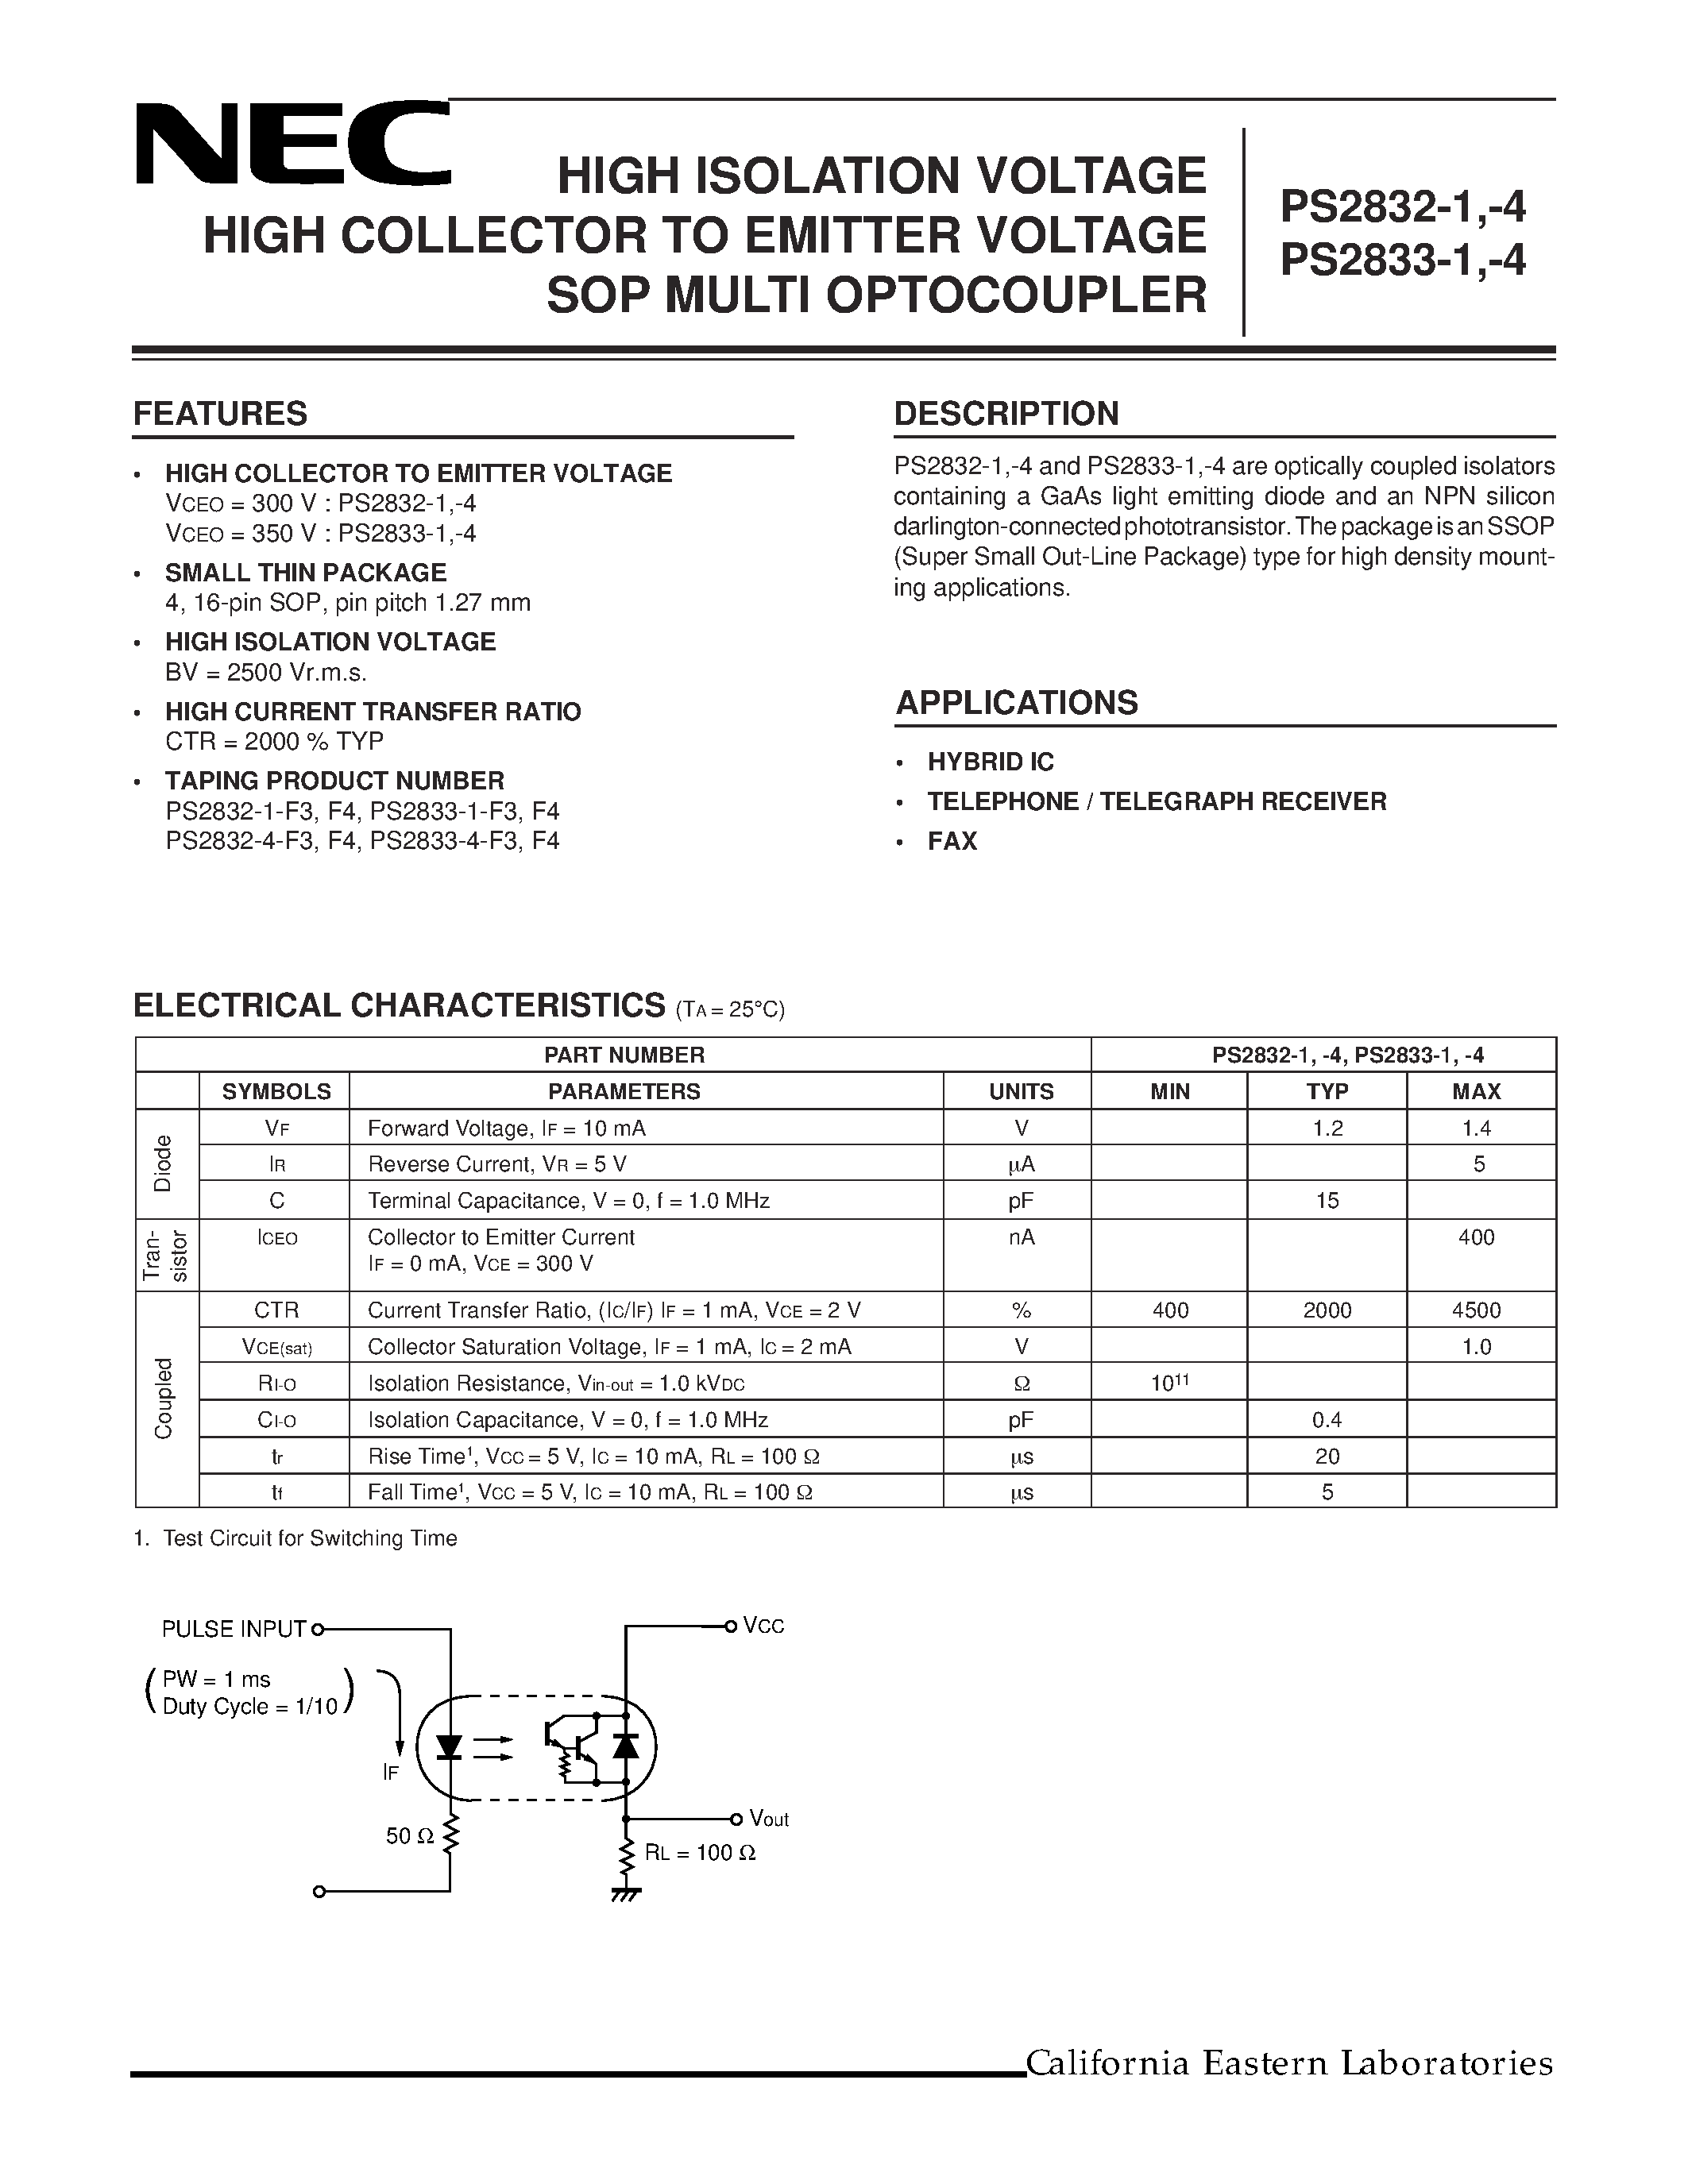 Datasheet PS2833-1-V-F3 - HIGH ISOLATION VOLTAGE HIGH COLLECTOR TO EMITTER VOLTAGE SOP MULTI OPTOCOUPLER page 1